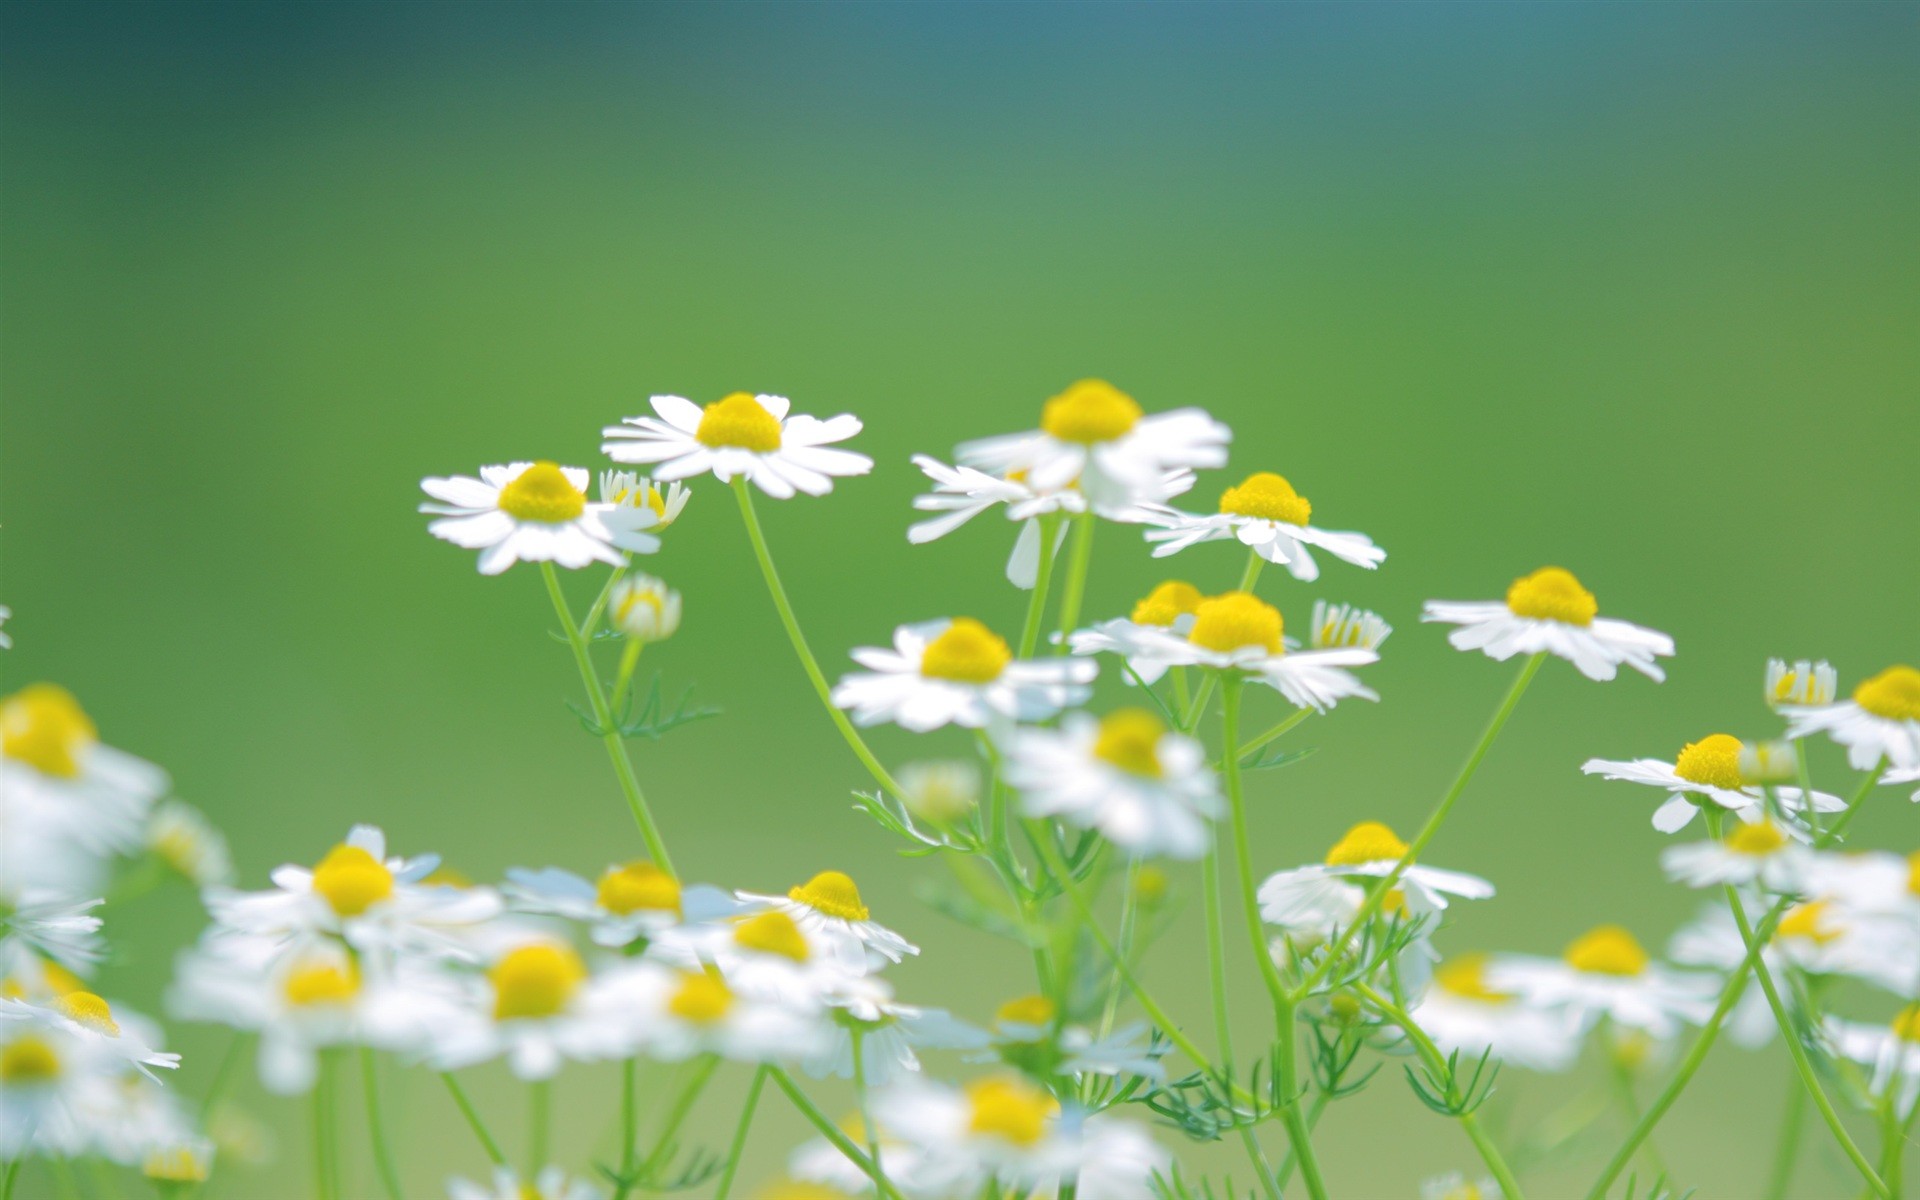 1920x1200 Daisies, White, Flowers, Nature, Summer, Green, Desktop, Background,  Wallpaper, Pictures, Iphone Background Images, Desktop Images, Cool, ...